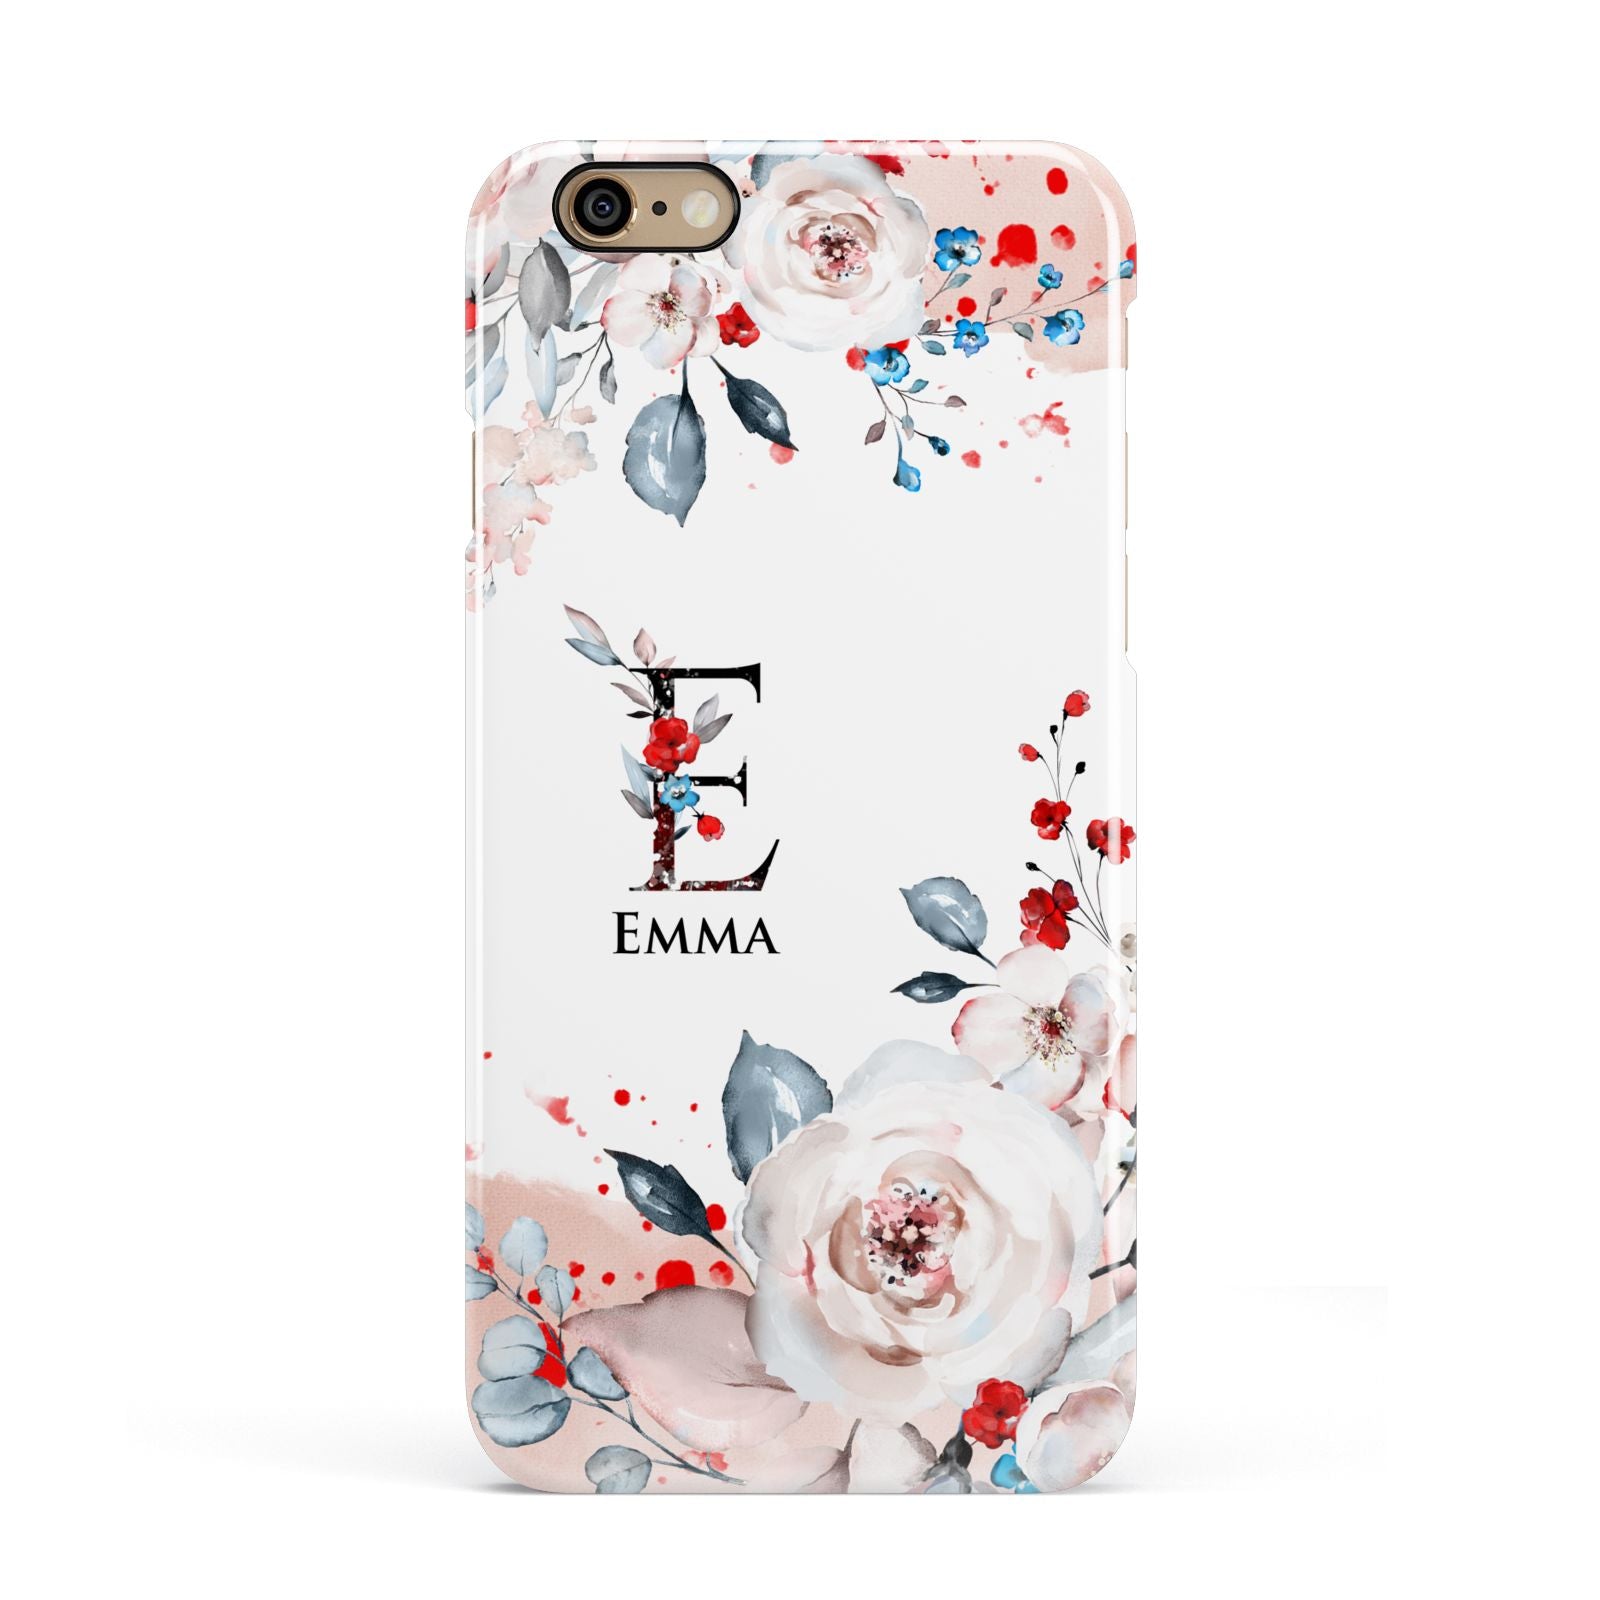 Monogrammed Roses Floral Wreath Apple iPhone 6 3D Snap Case